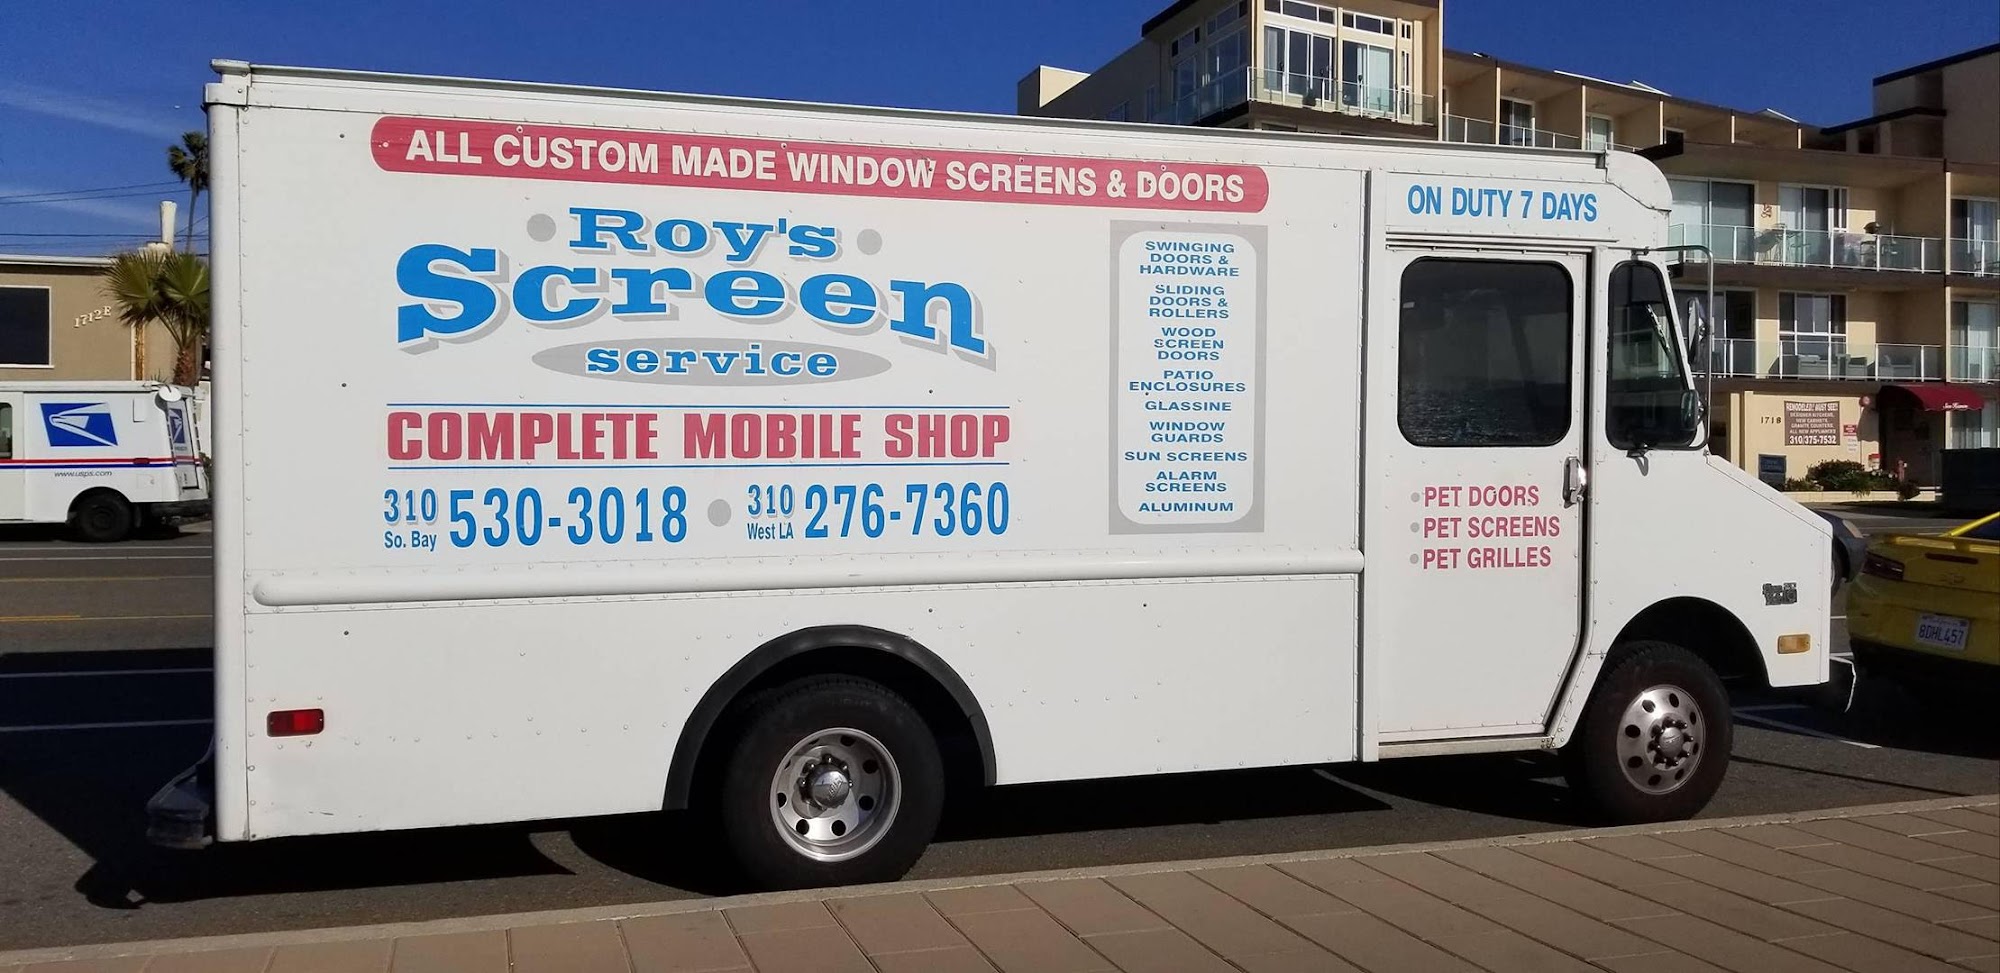 Roy's Screen Services